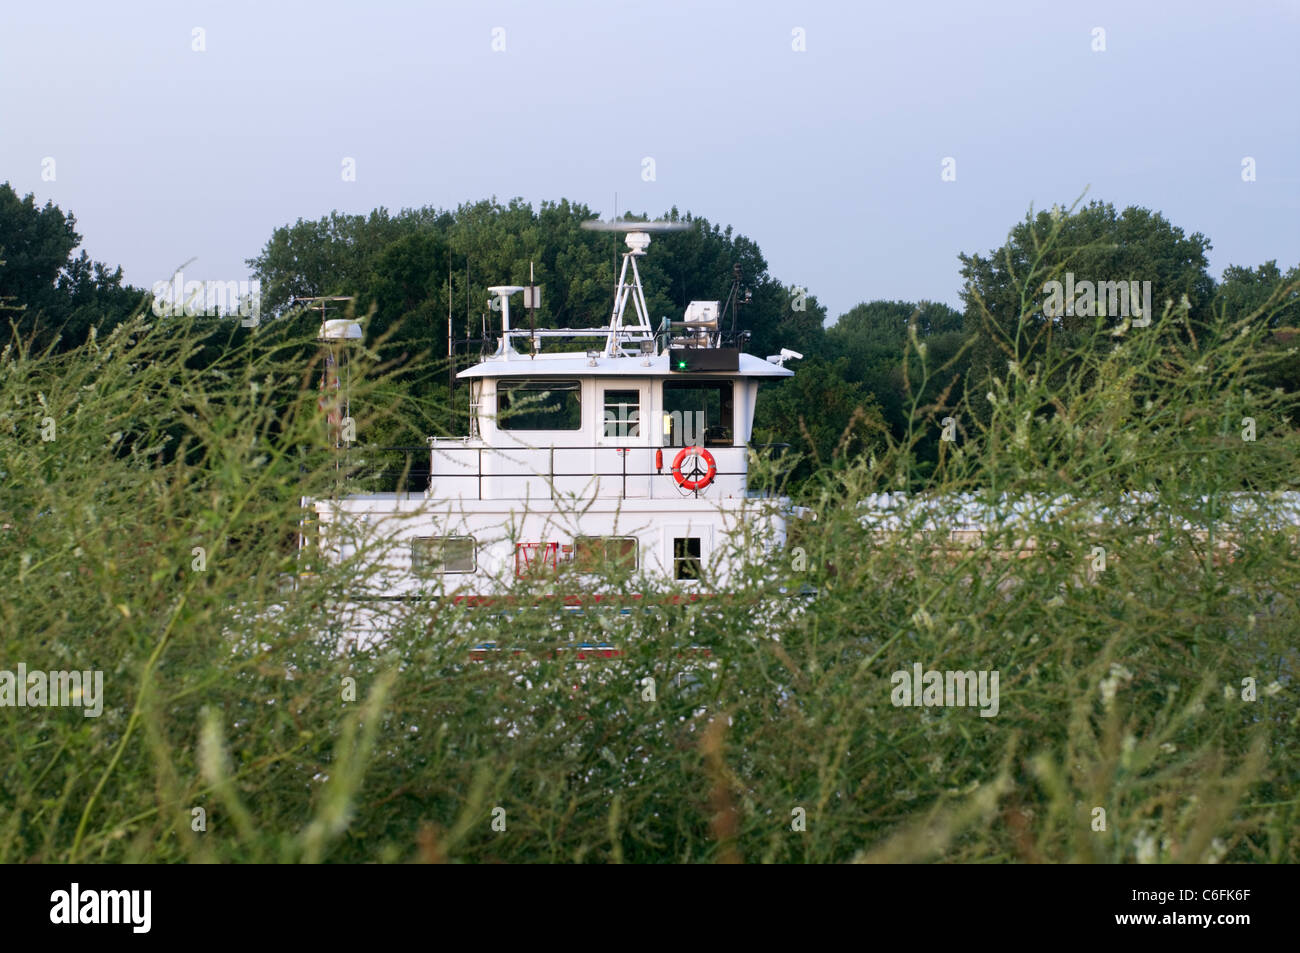 Tugboat on banks of Mississippi River seen through tall grass with trees in background Stock Photo